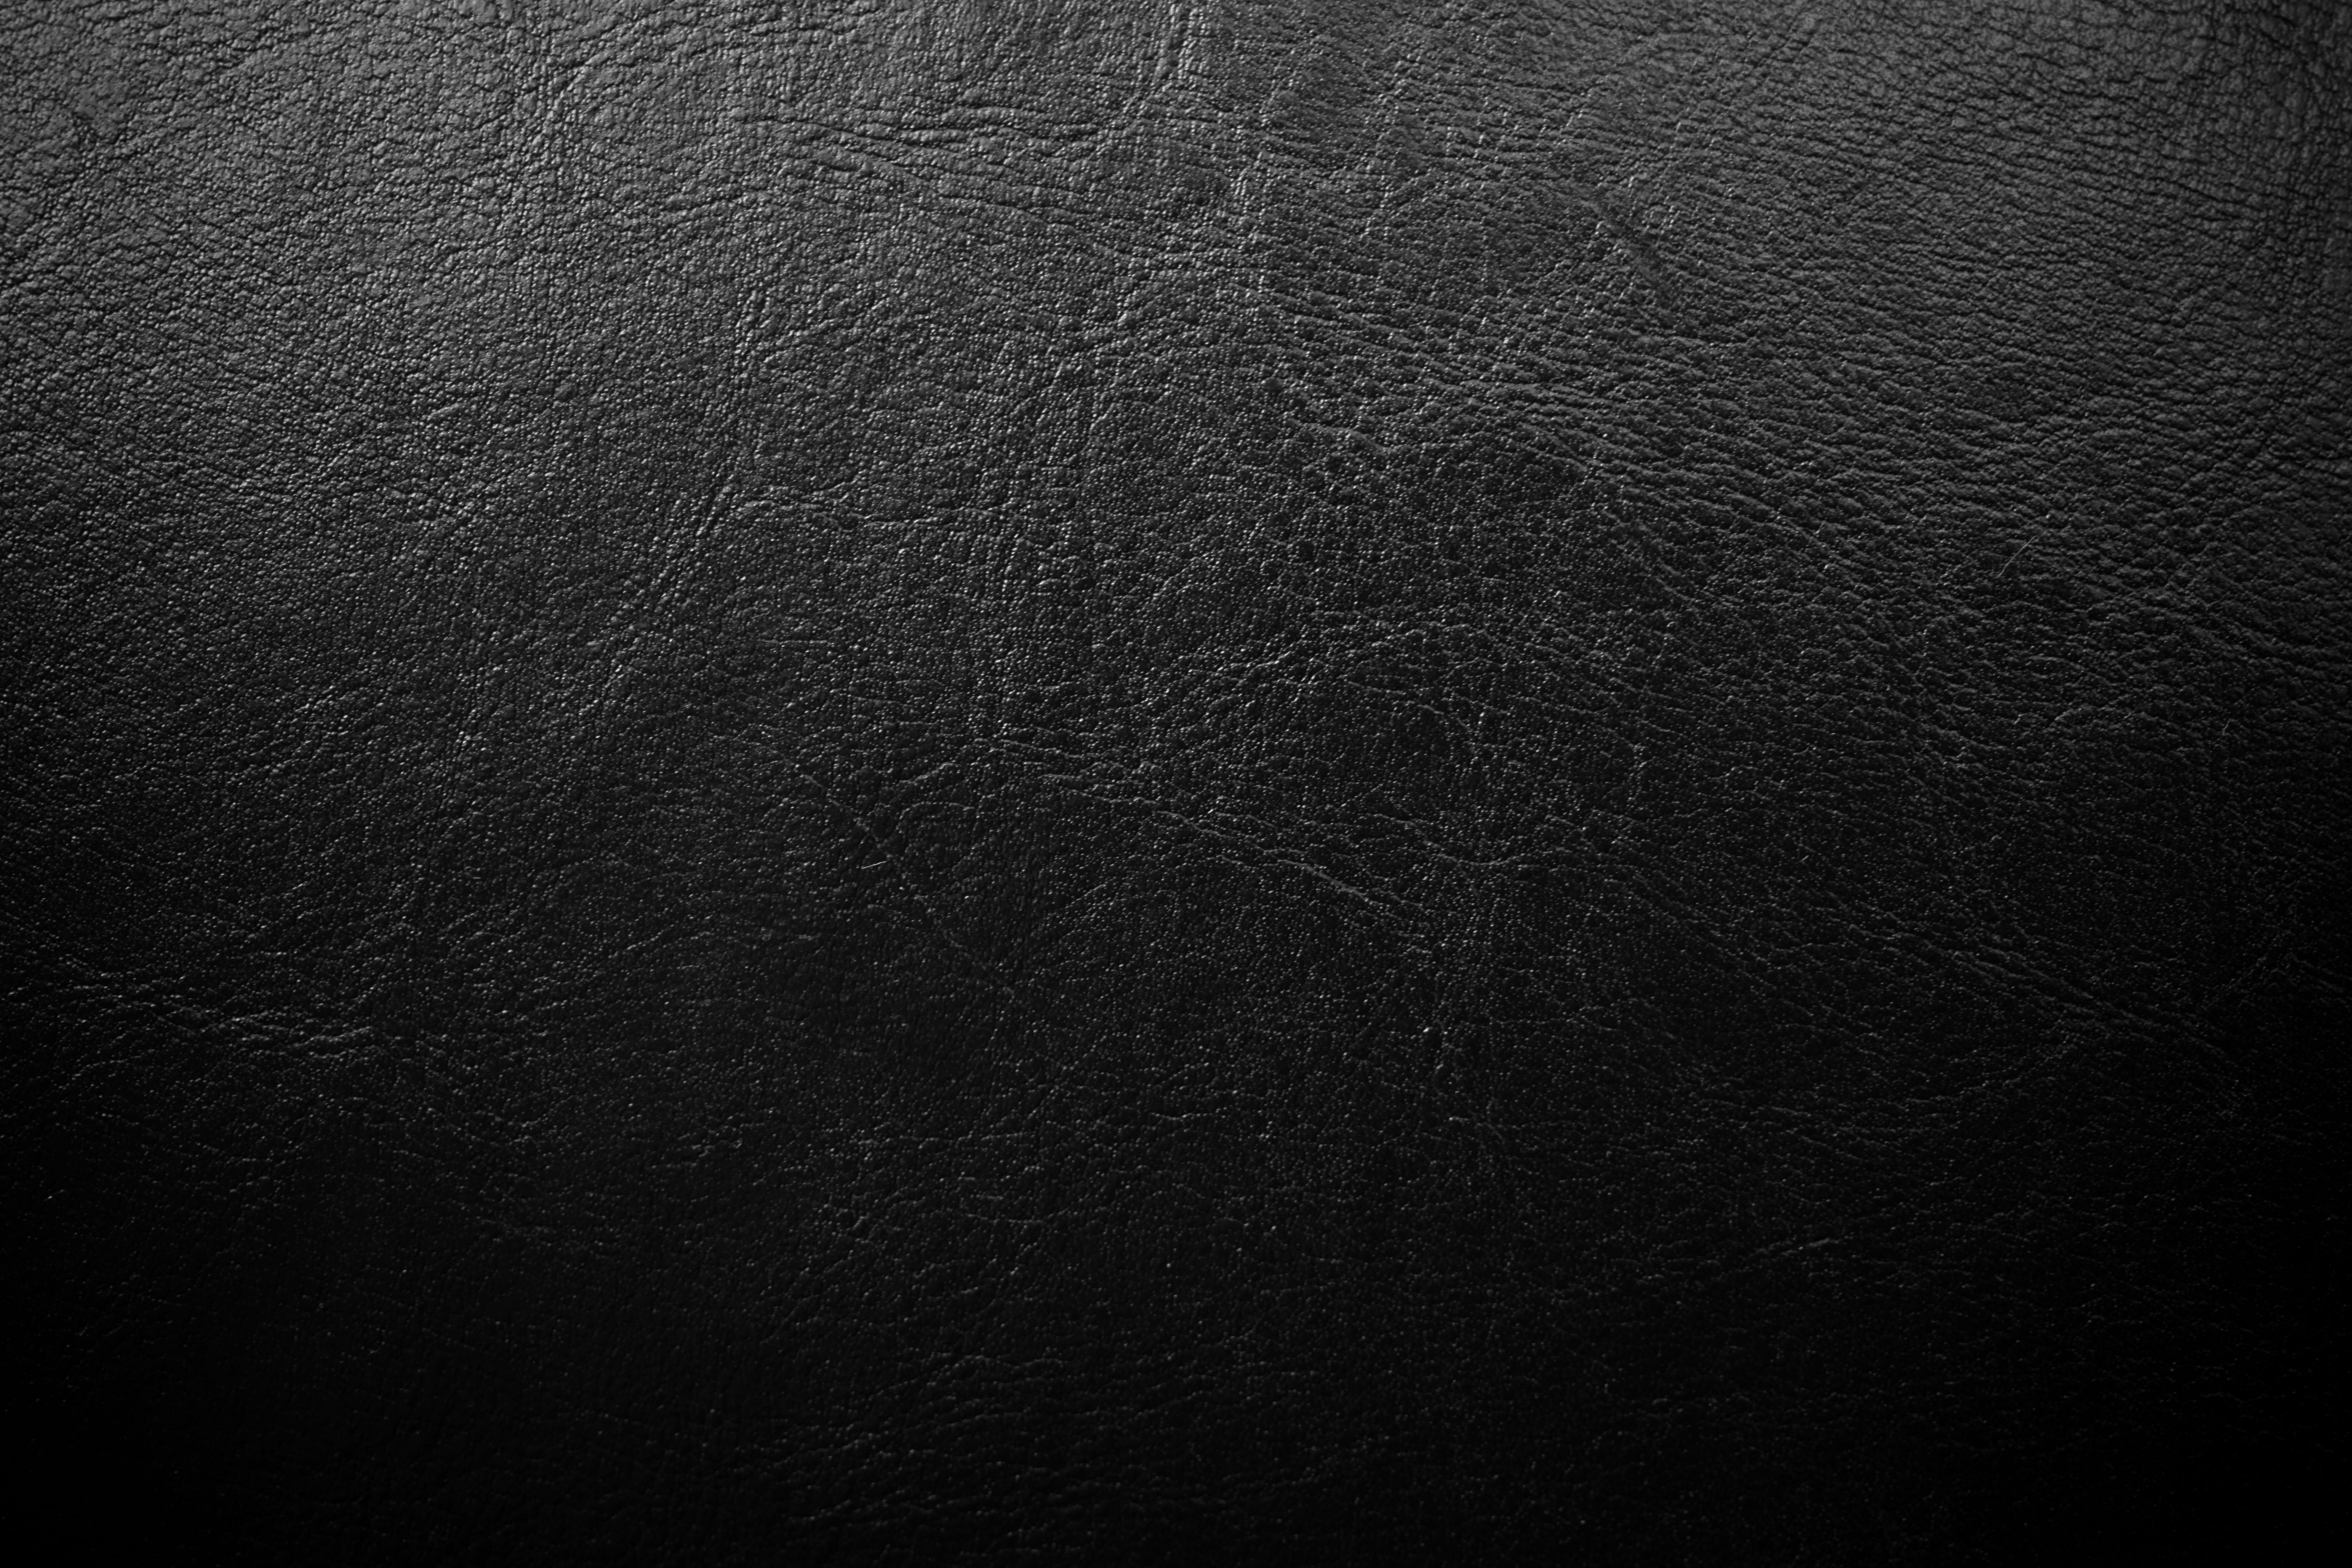 Gallery for - black leather textures